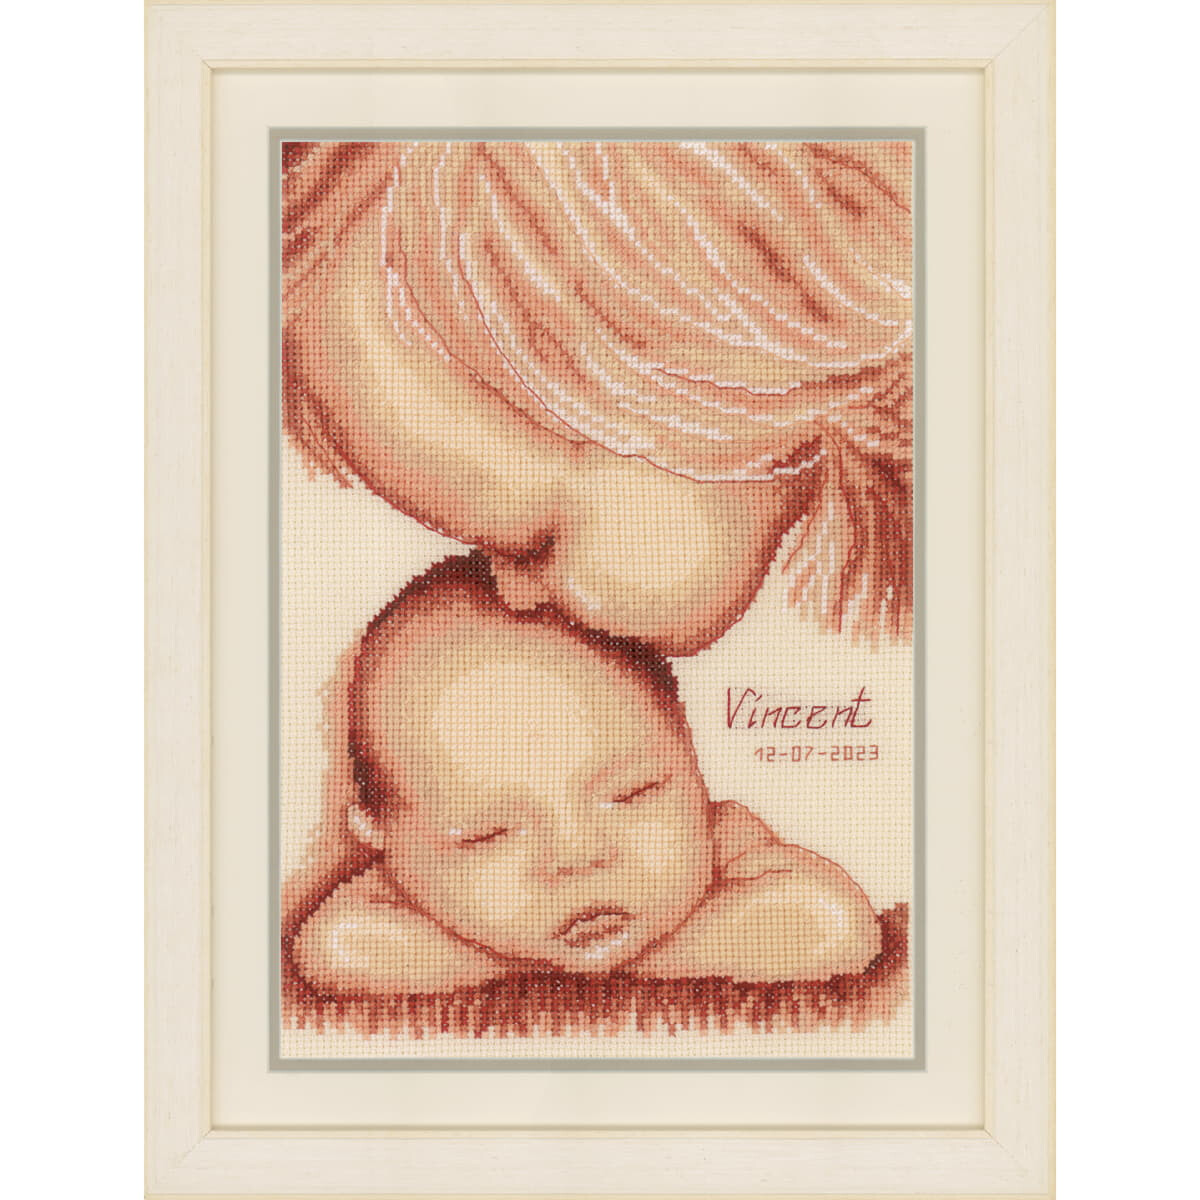 Vervaco counted cross stitch kit "Childrens...